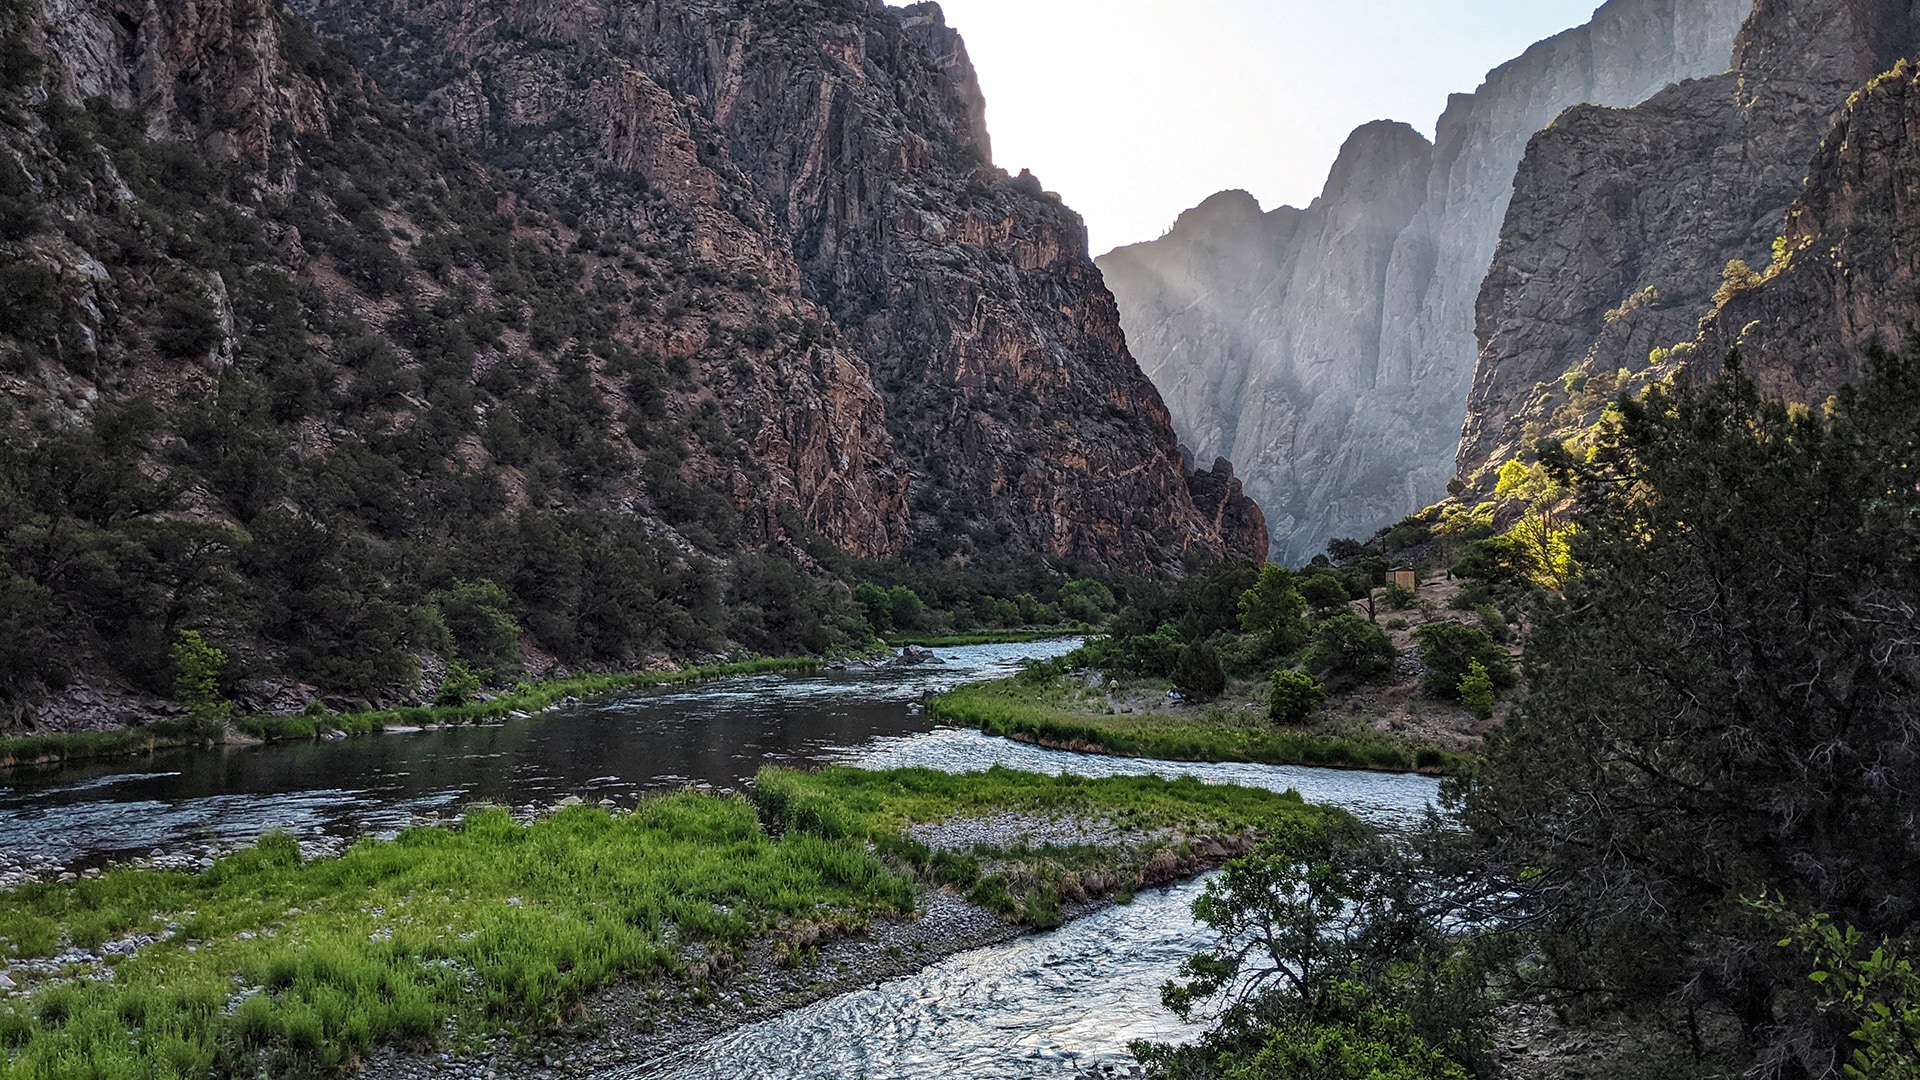 Morning light streams into the Black Canyon of the Gunnison.